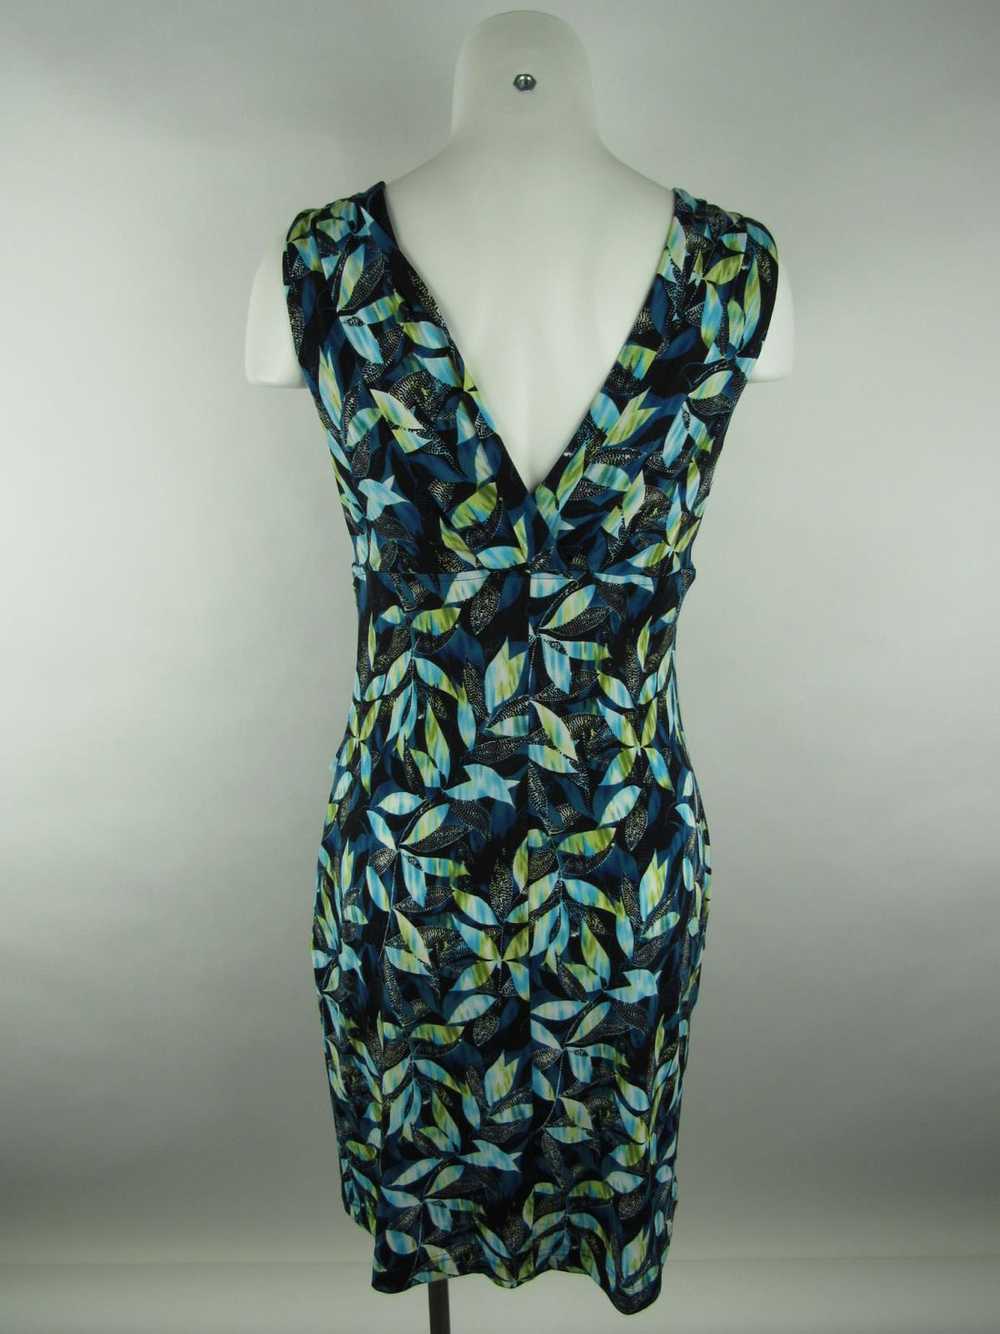 Connected Apparel Sheath Dress - image 2